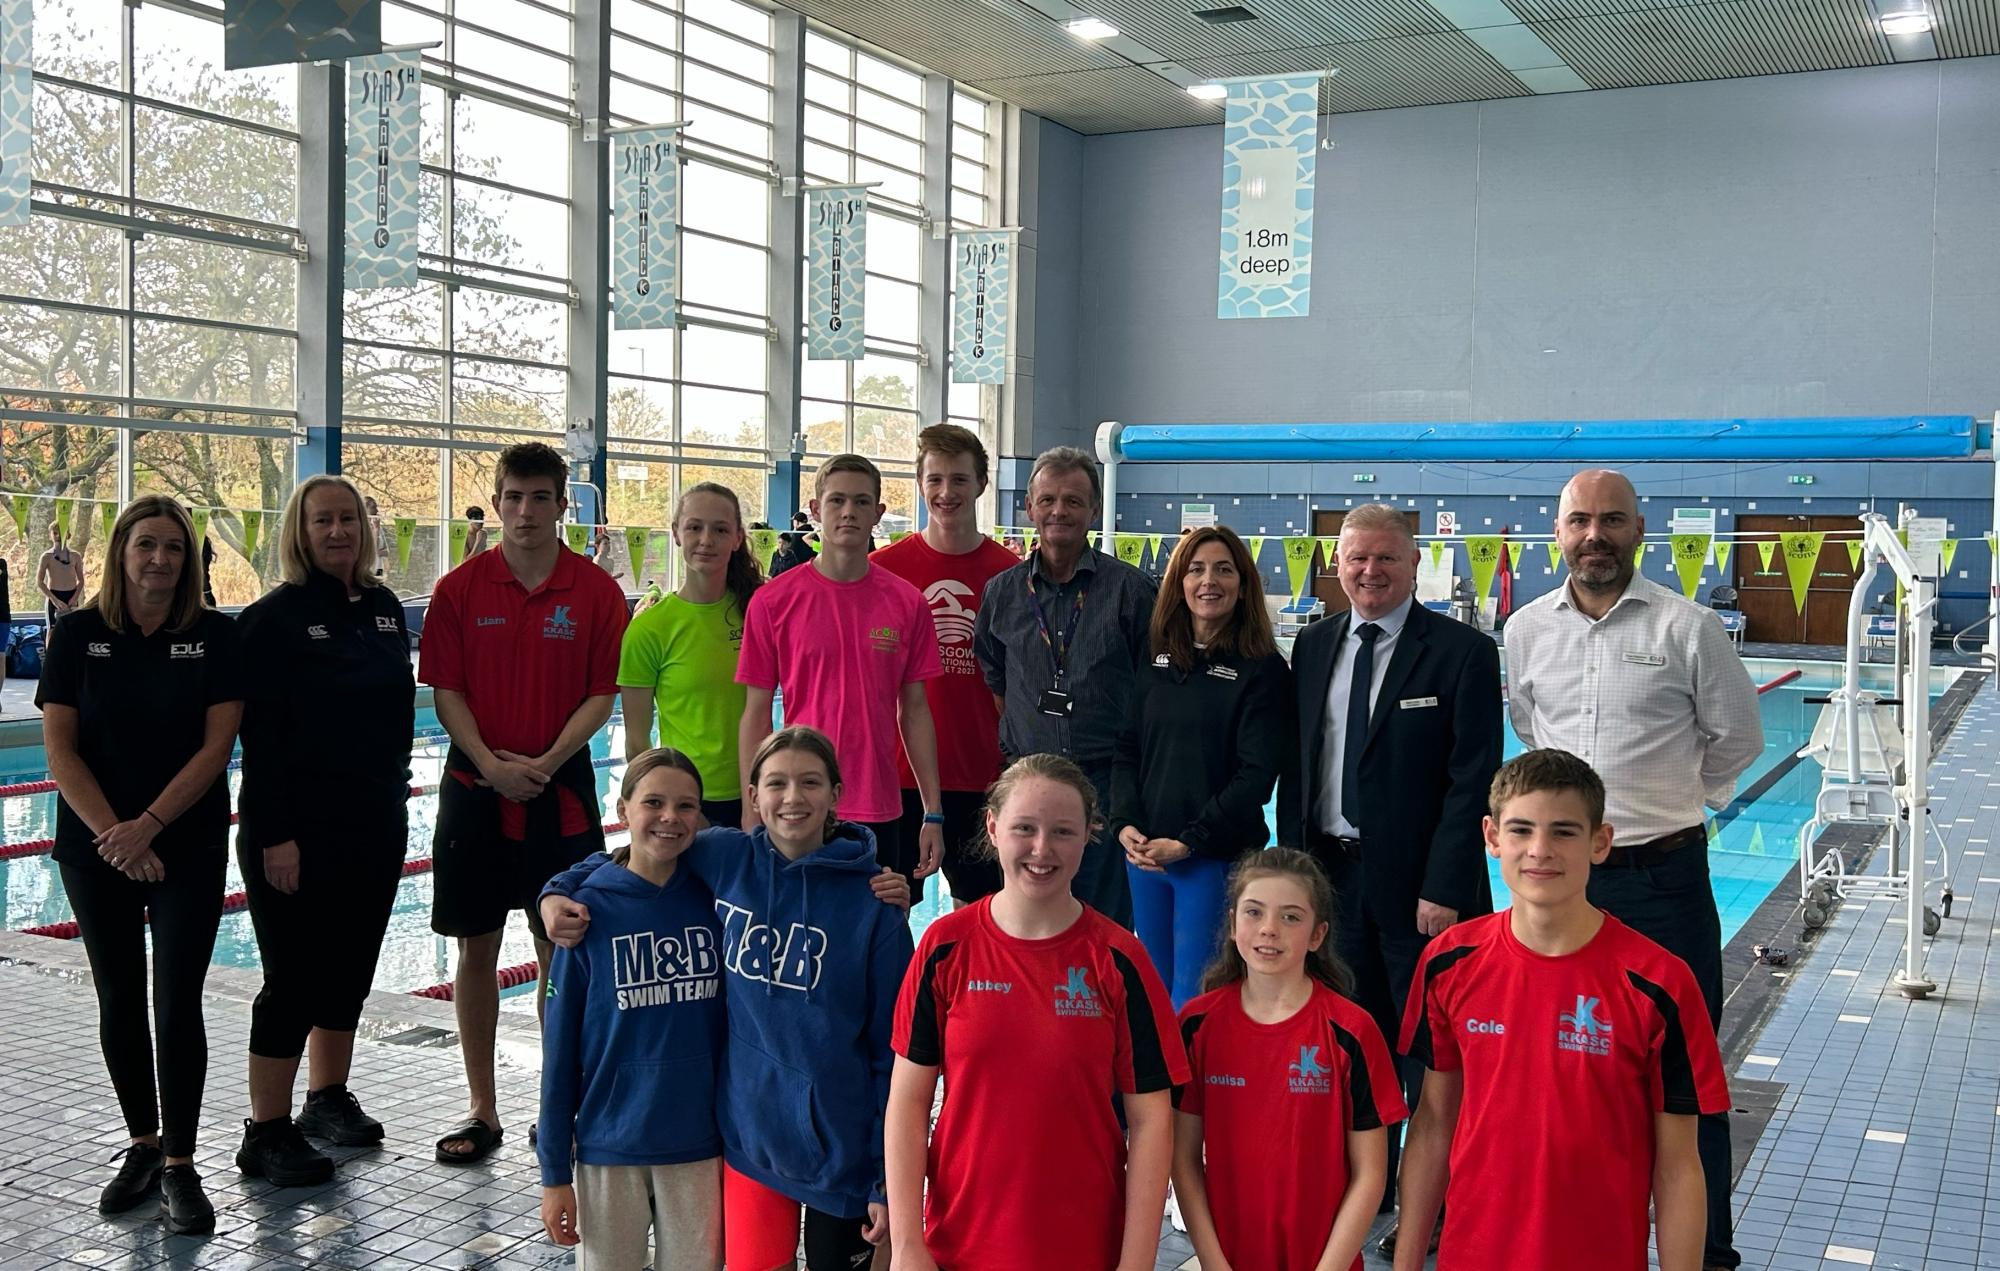 Cllr Gibbons (fourth right) and Mark Grant, EDLC Trust General Manger (second right) with organisers and competitors at The Leisuredrome.